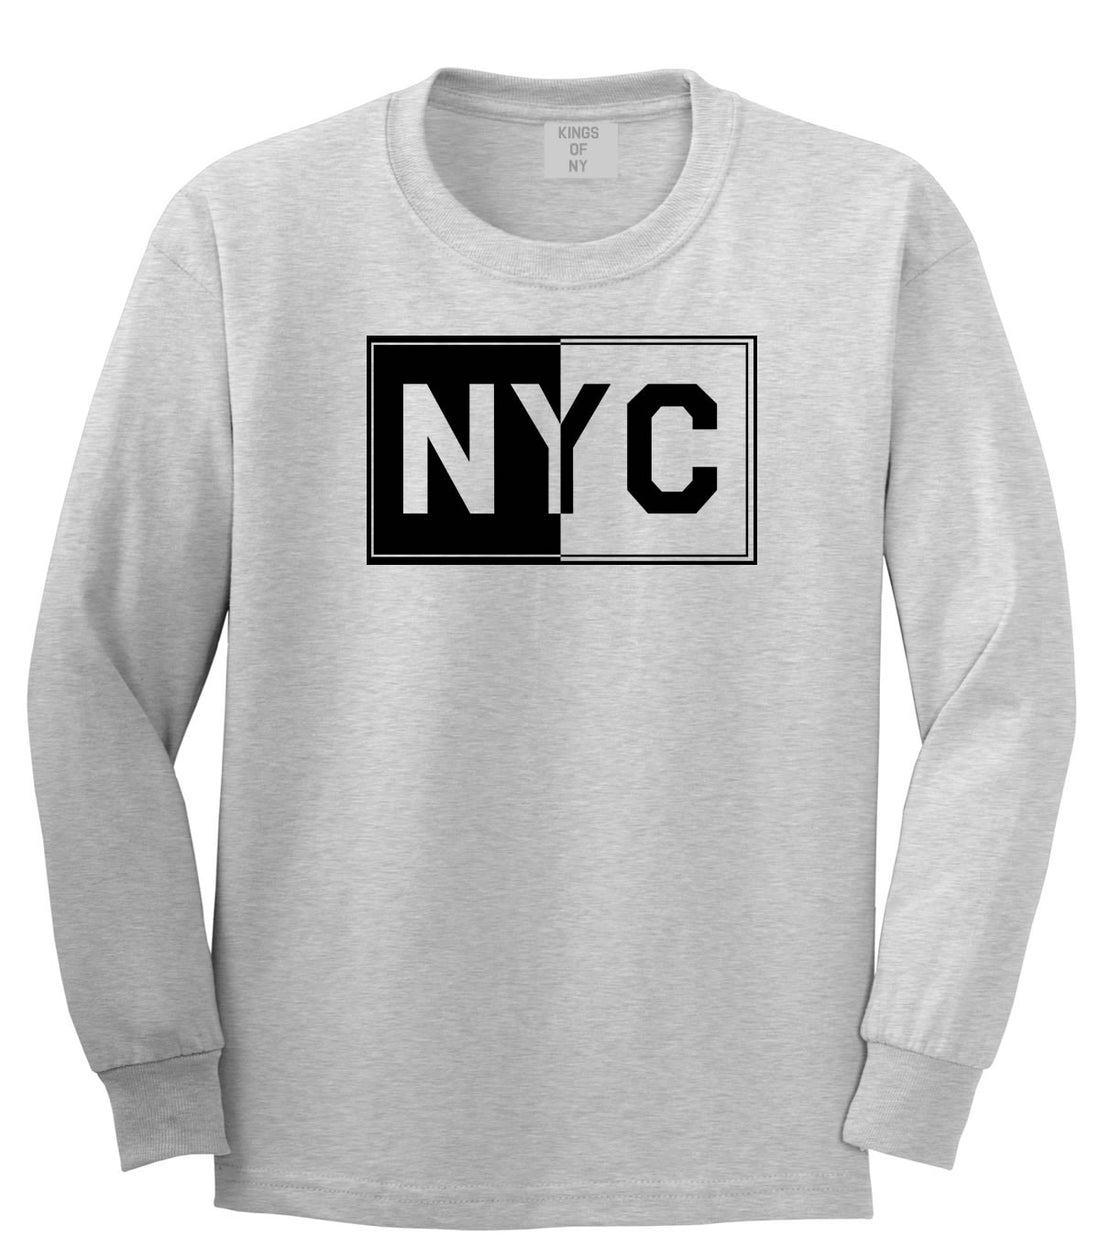 NYC Rectangle New York City Long Sleeve T-Shirt in Grey By Kings Of NY